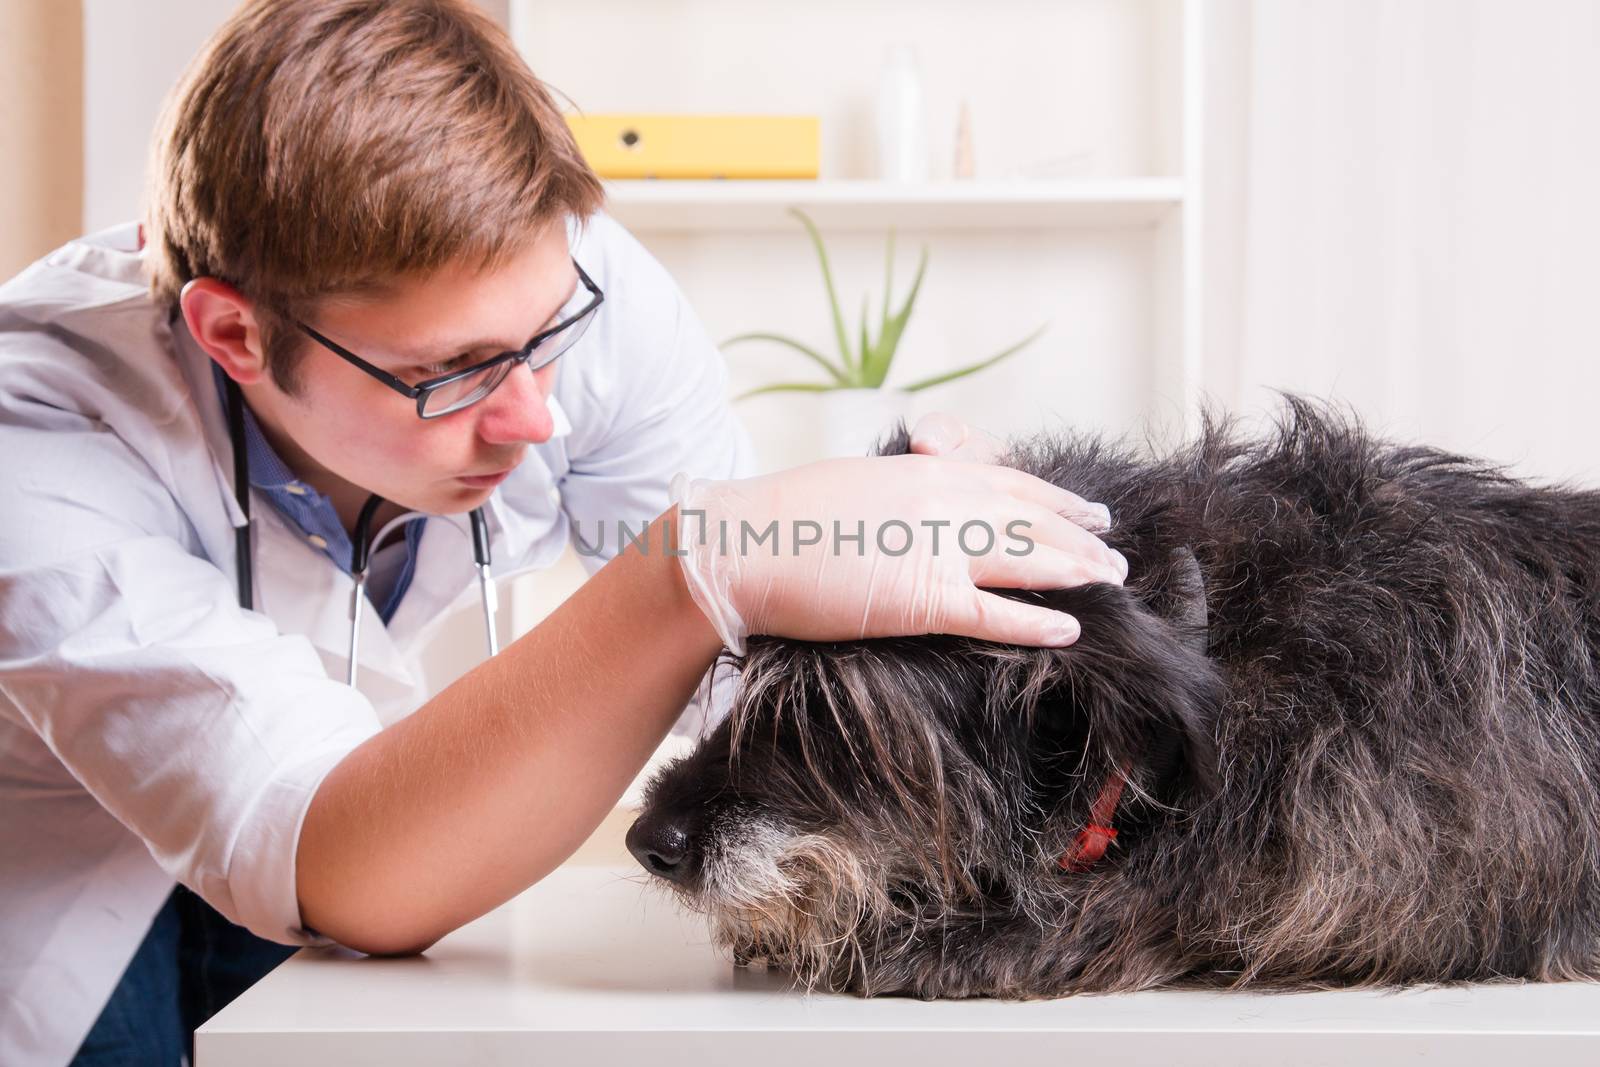 Vet examines the dog's ears in the office by MichalLudwiczak